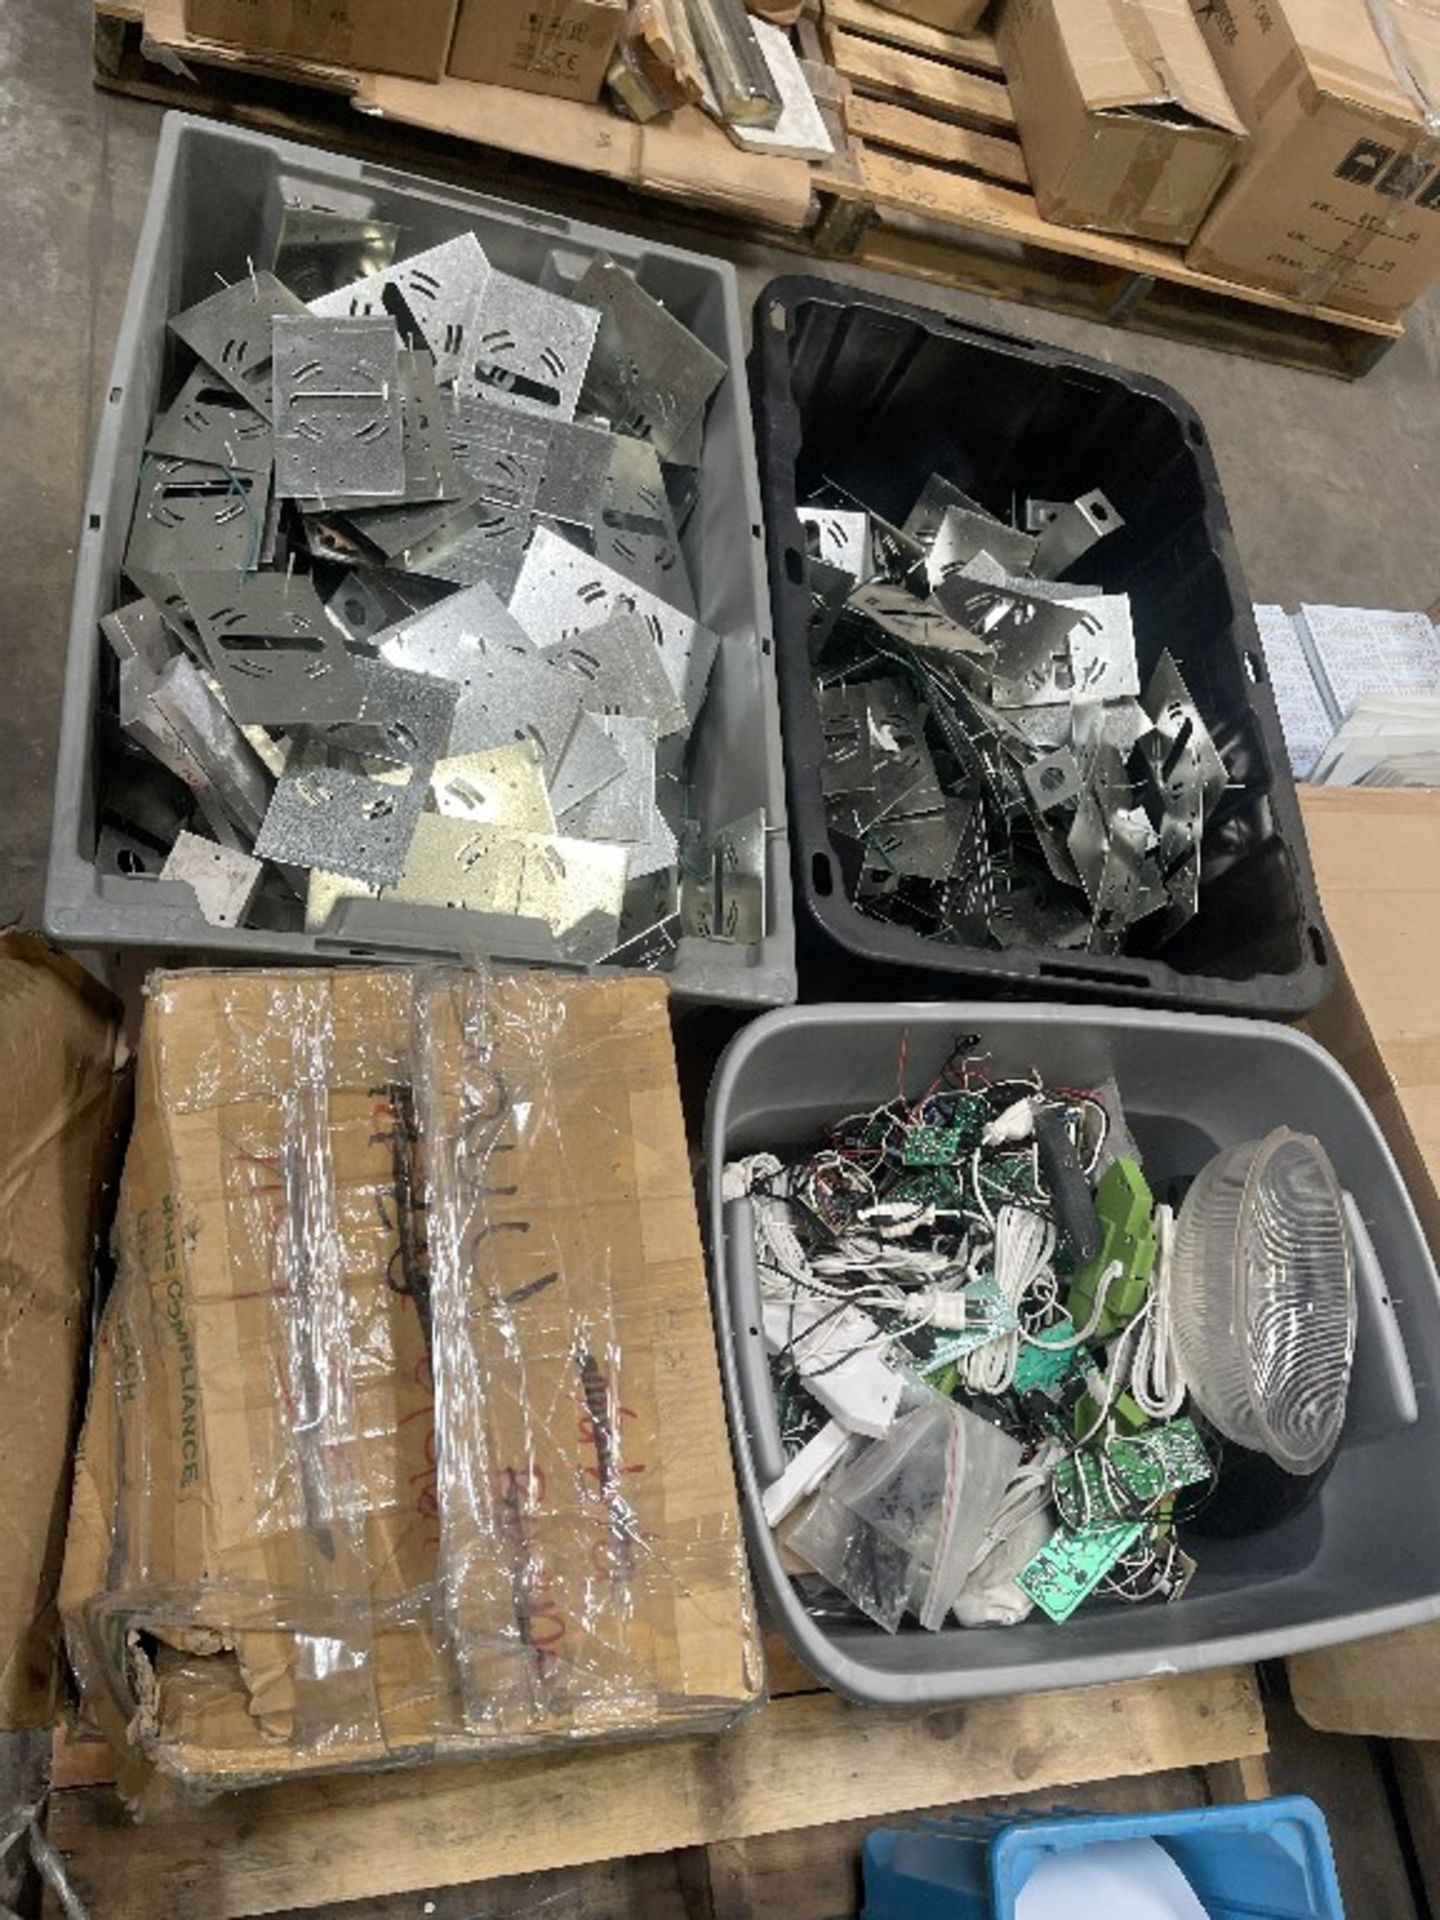 HARDWARE, WIRE & COMPONENTS 3 PALLETS + 1 X - Image 2 of 3